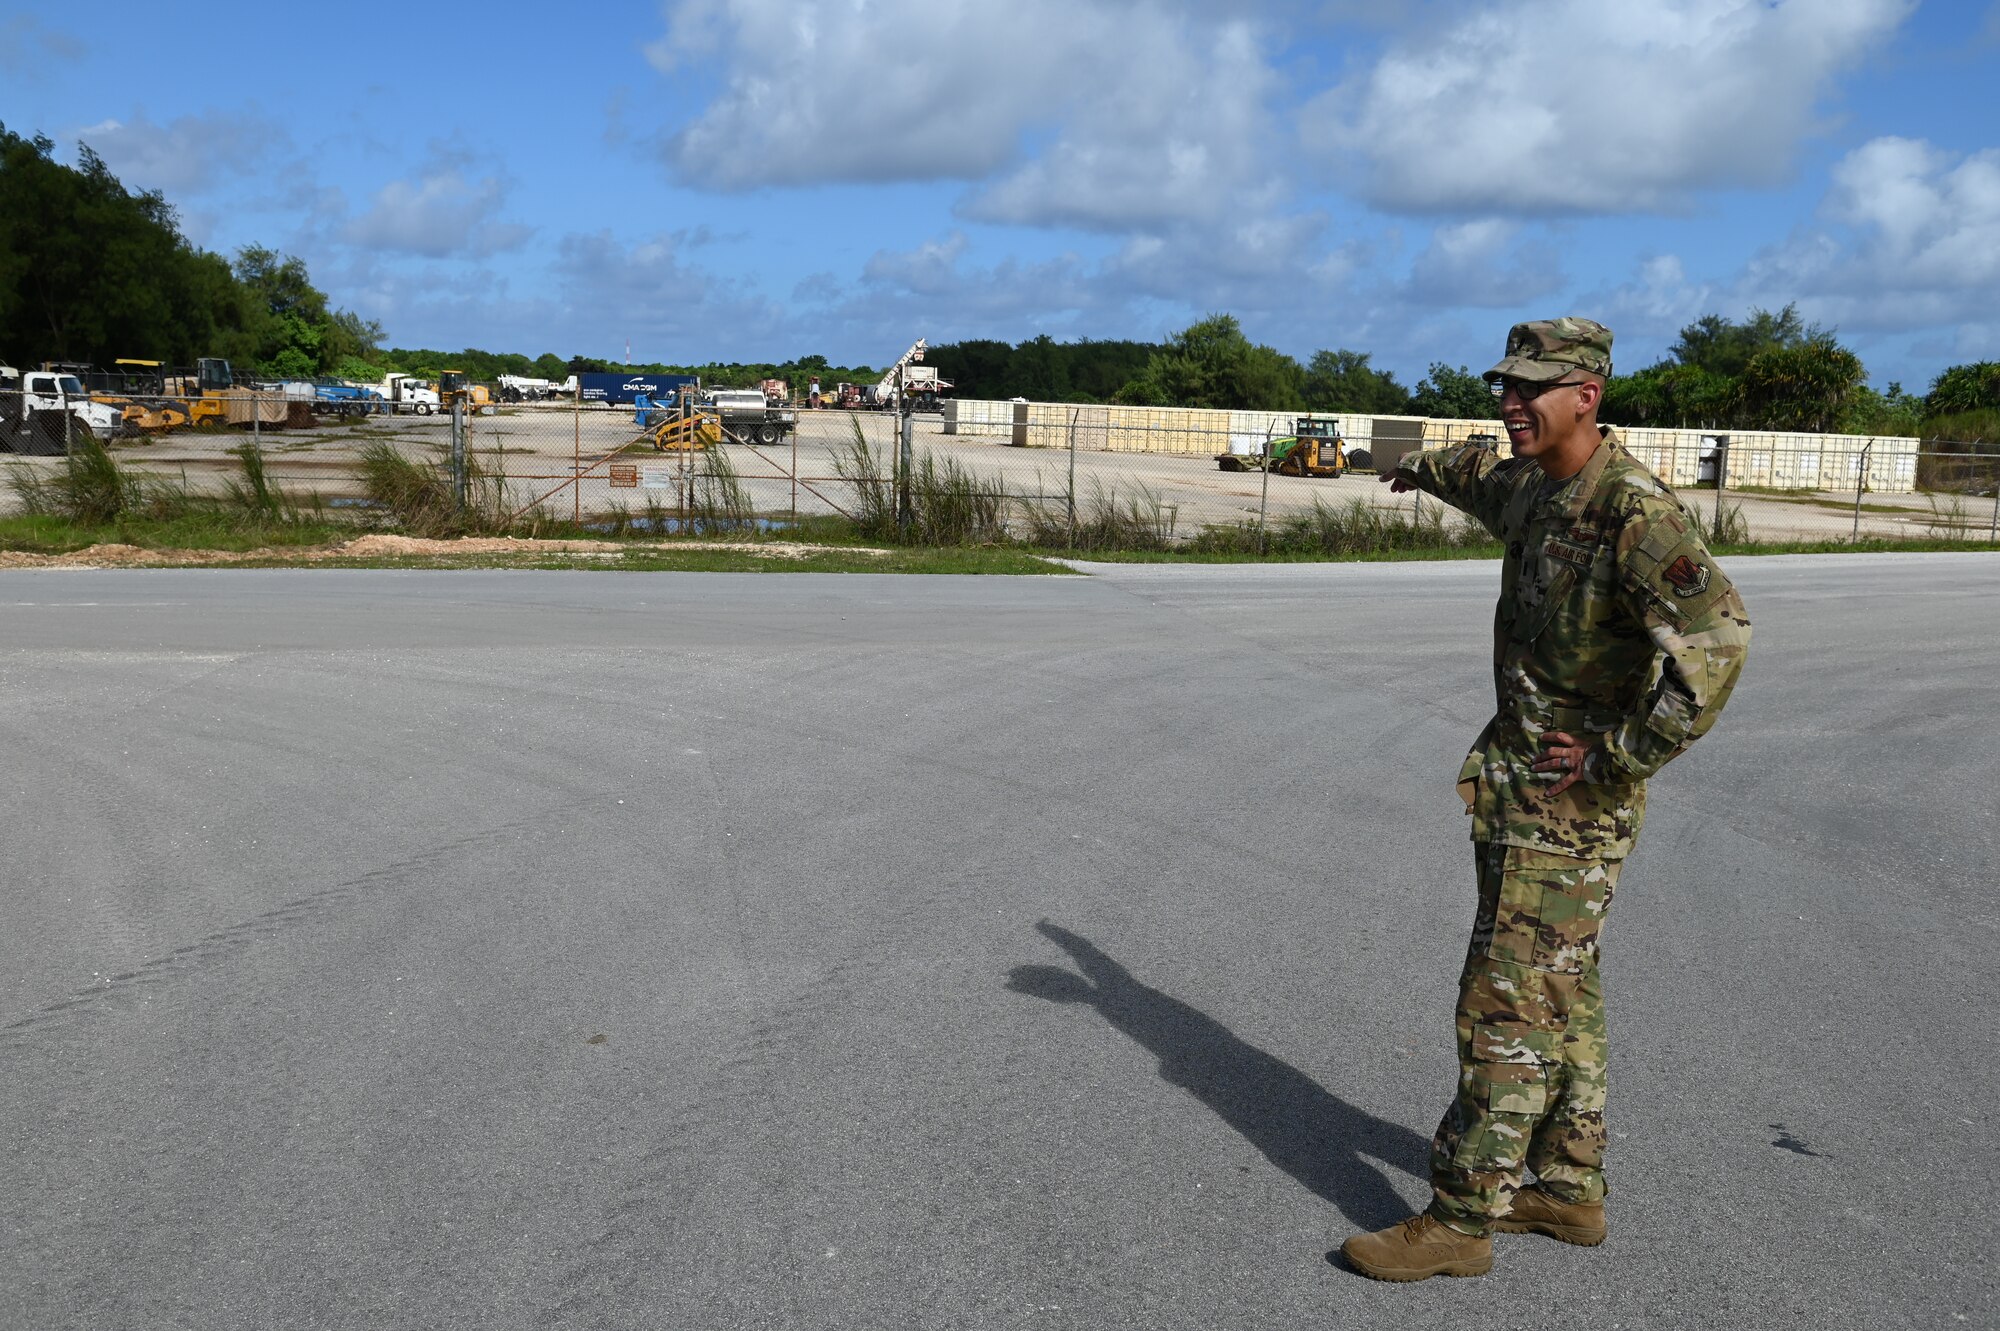 1st Lt Benavides pointing to an area.